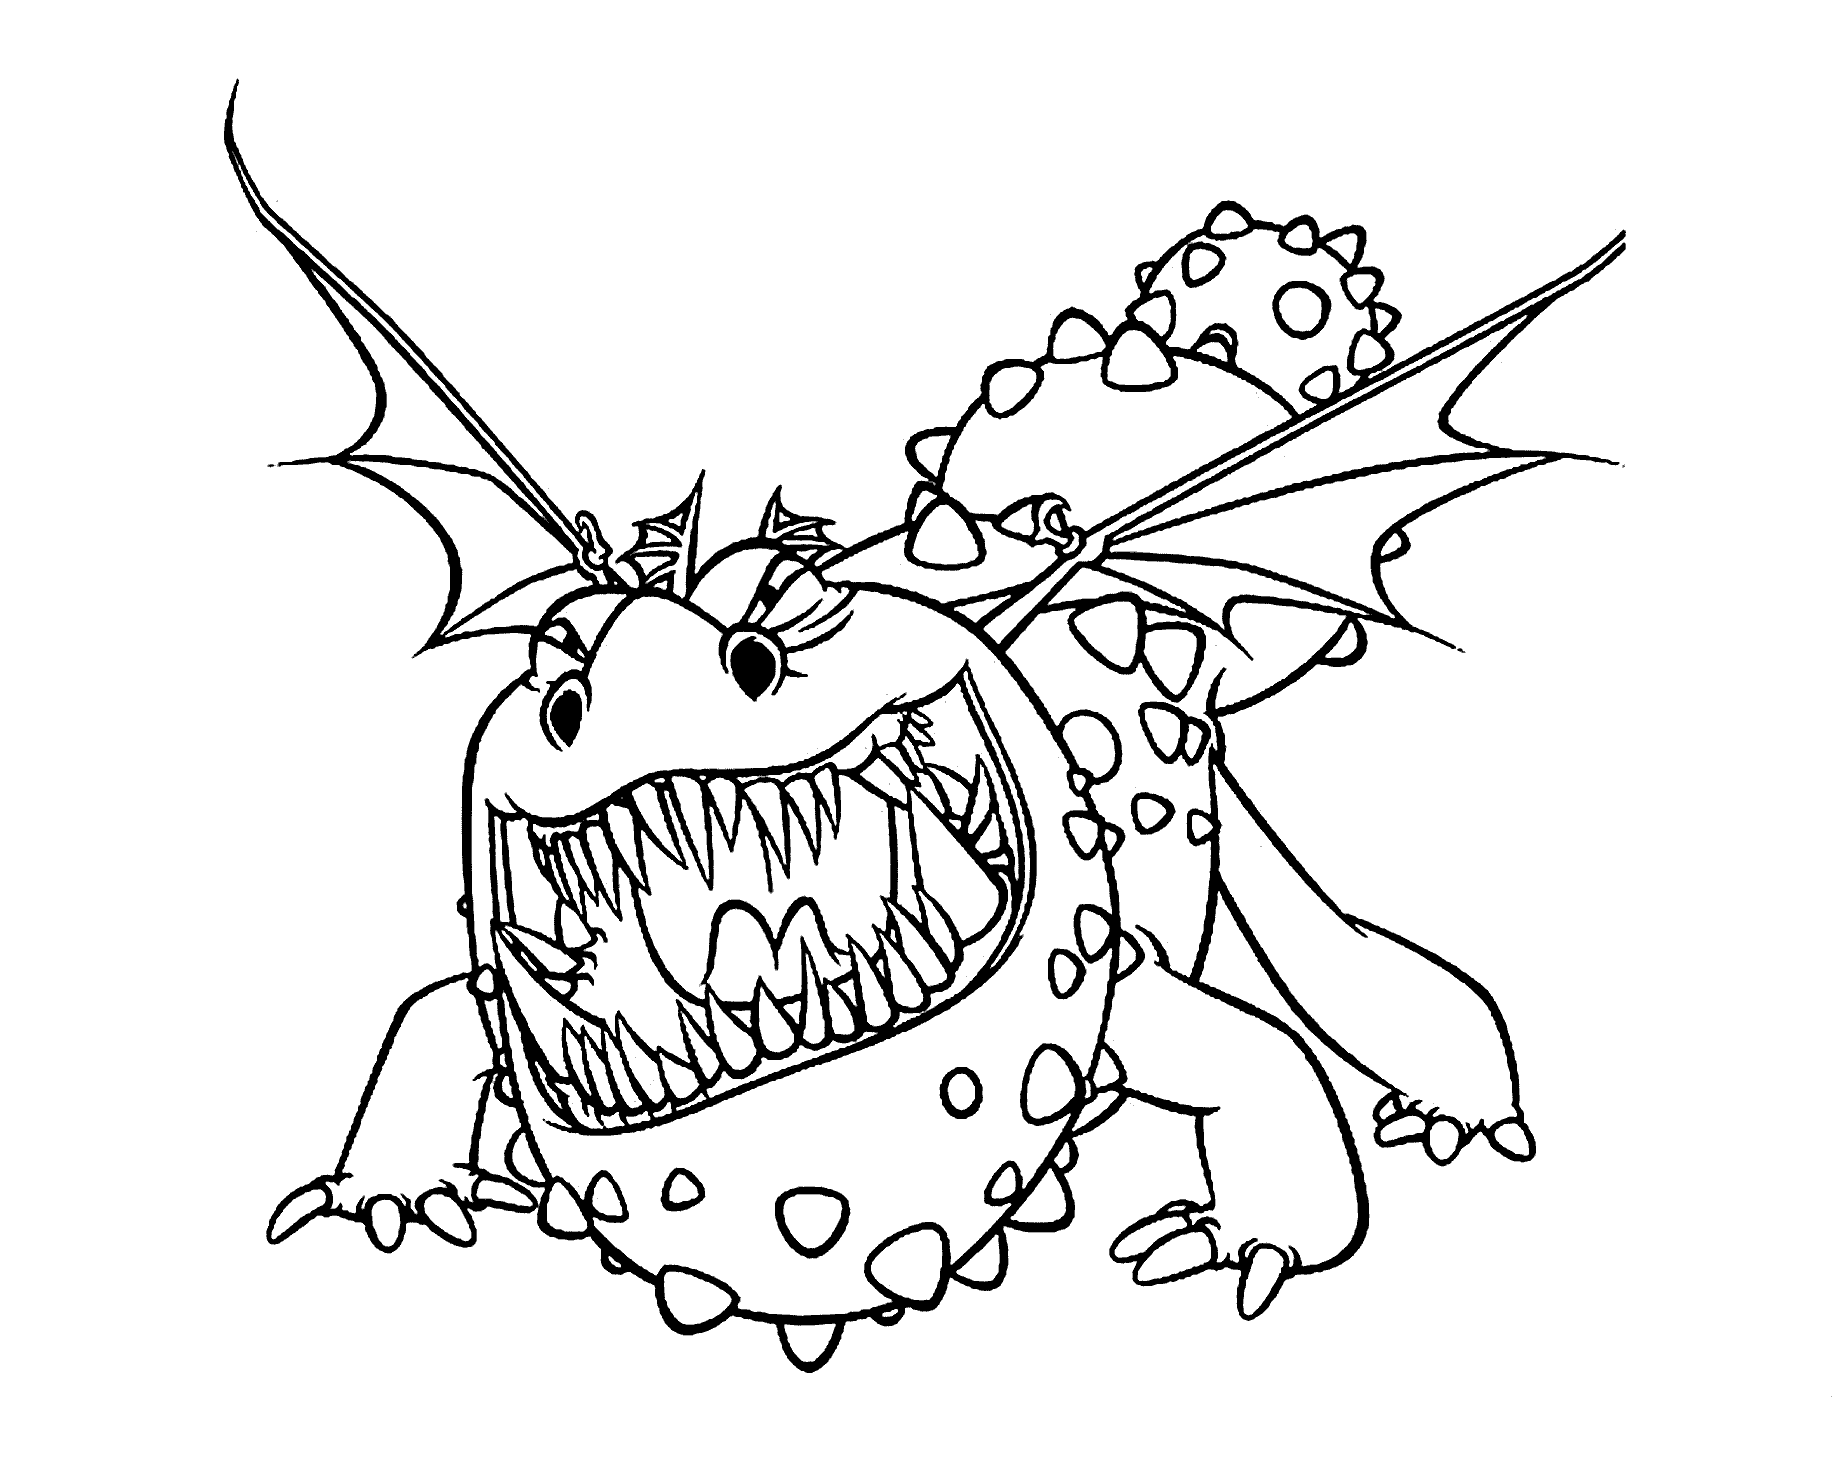 How to Train Your Dragon Coloring Pages TV Film Printable 2020 03881 Coloring4free